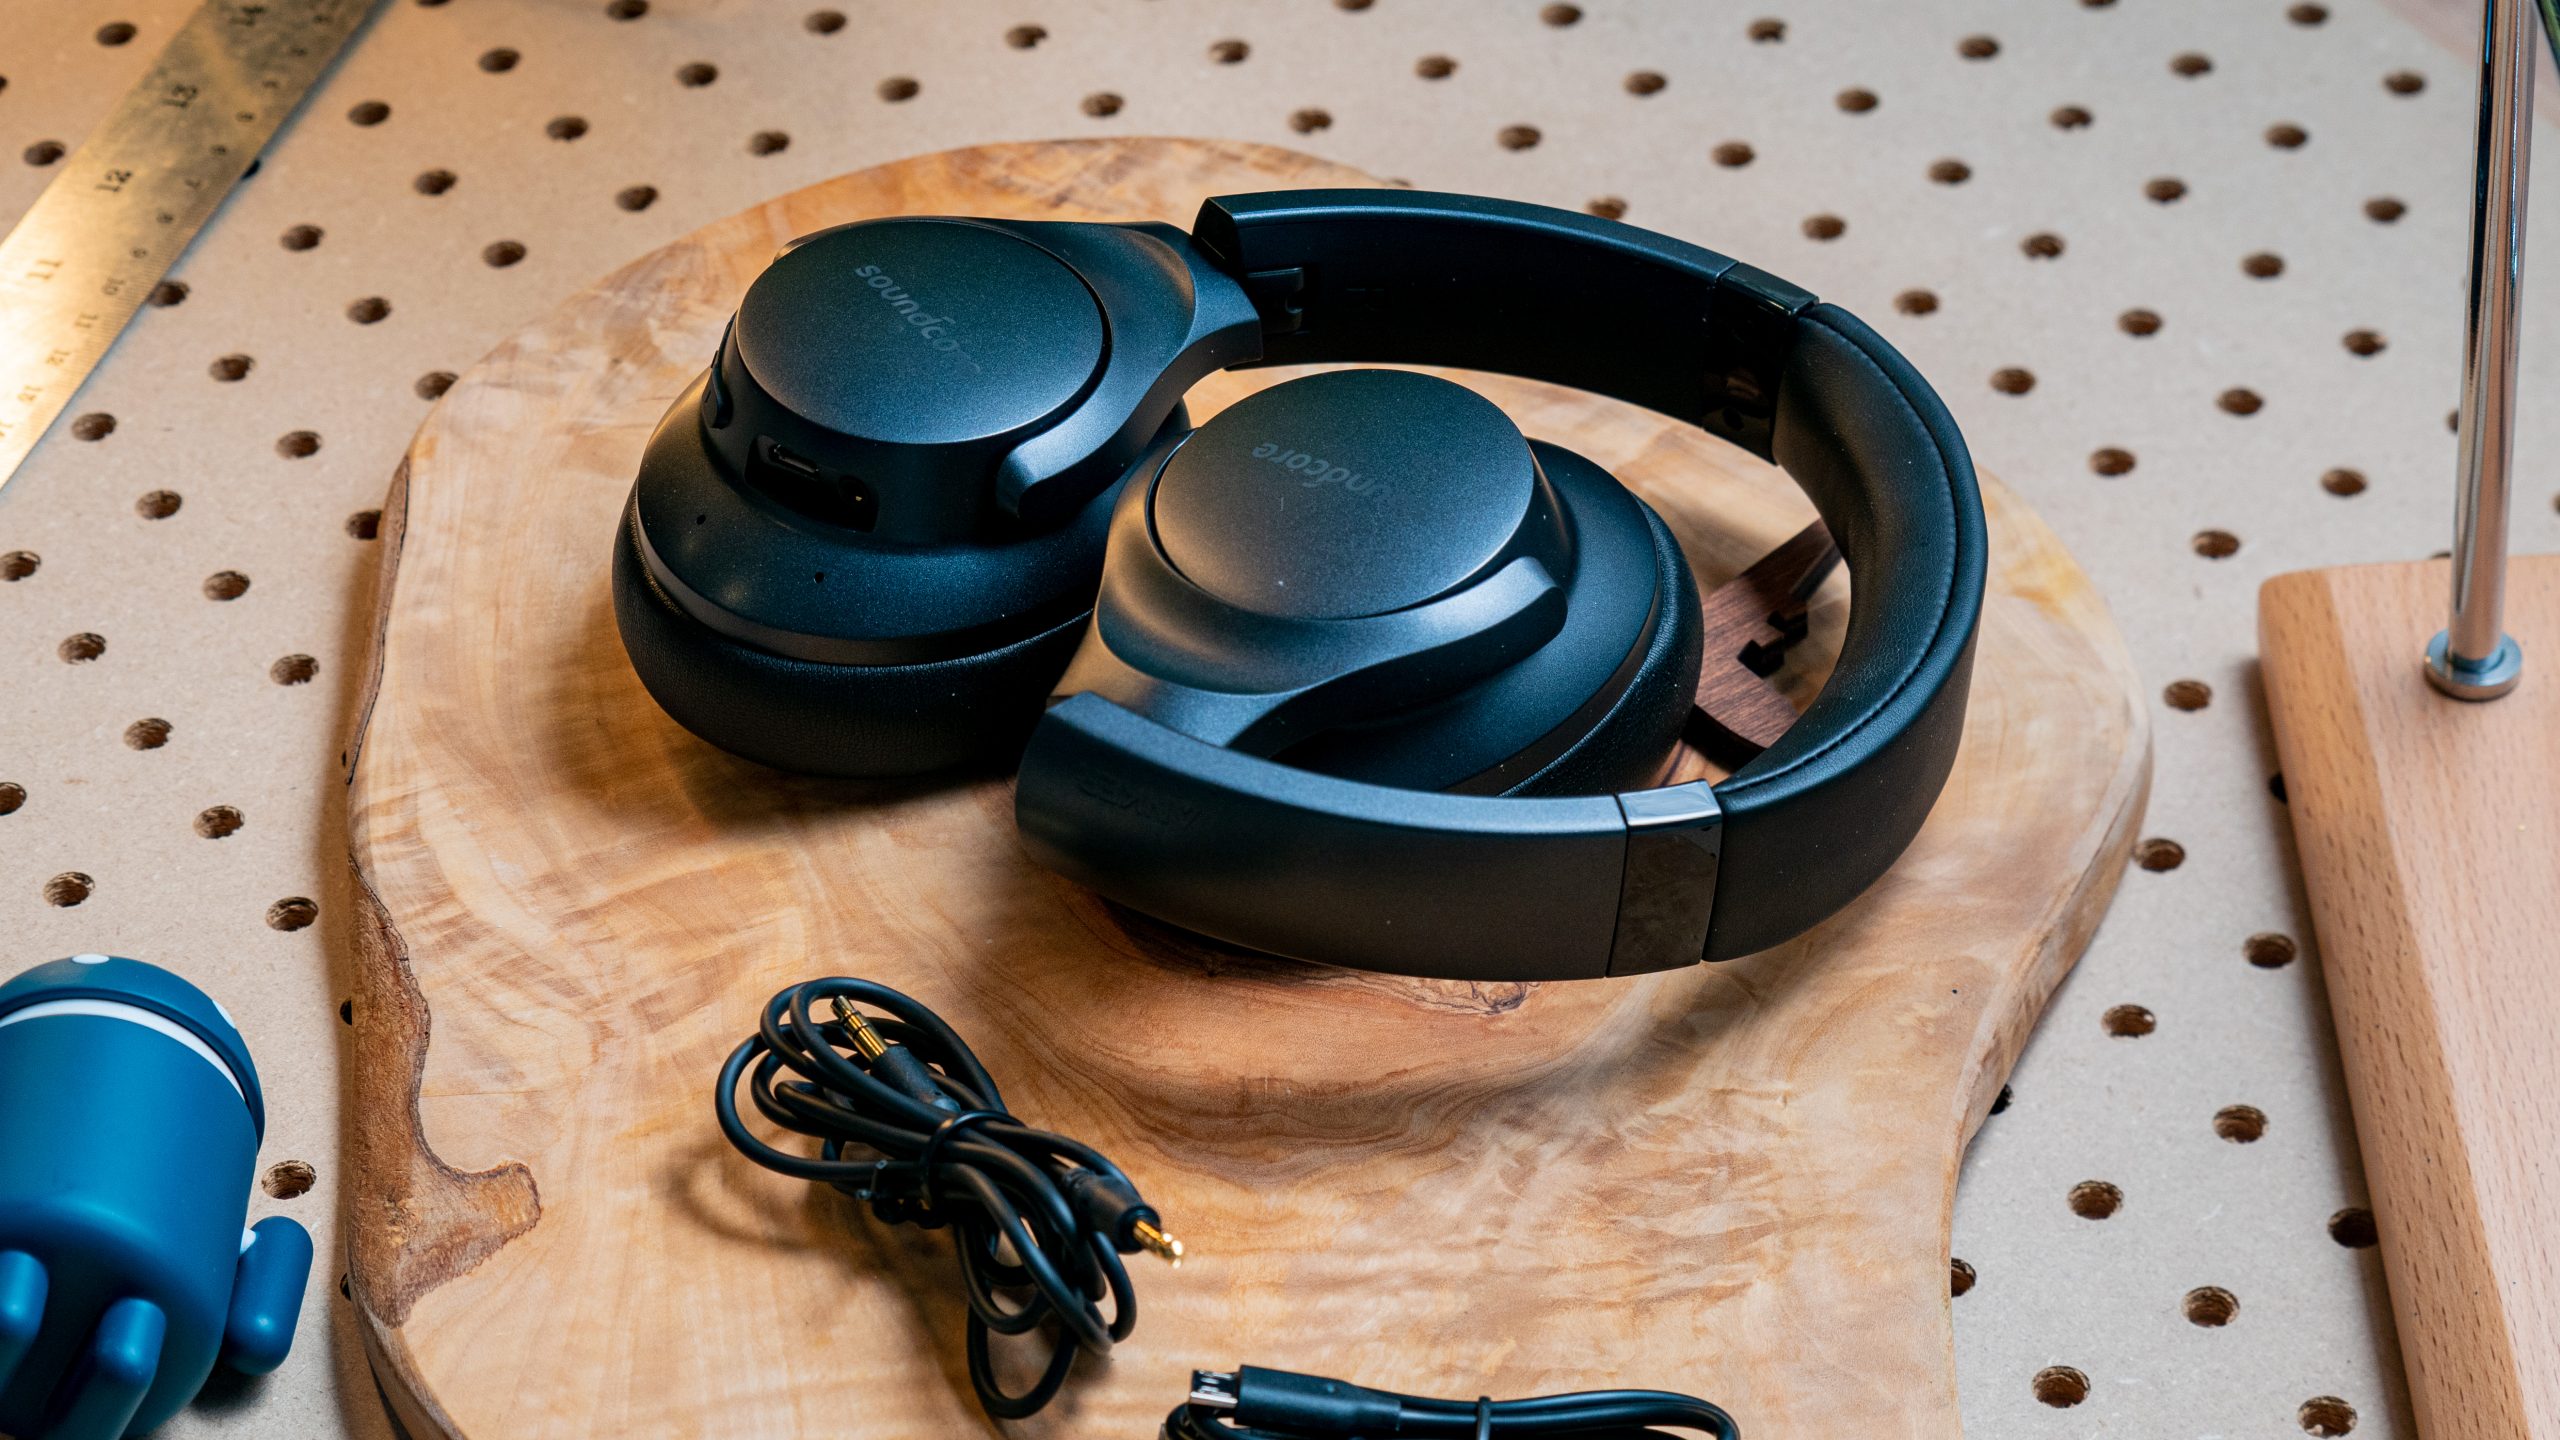 The Anker Soundcore Life Q20 wireless noise canceling headphones and cables on a wood surface.